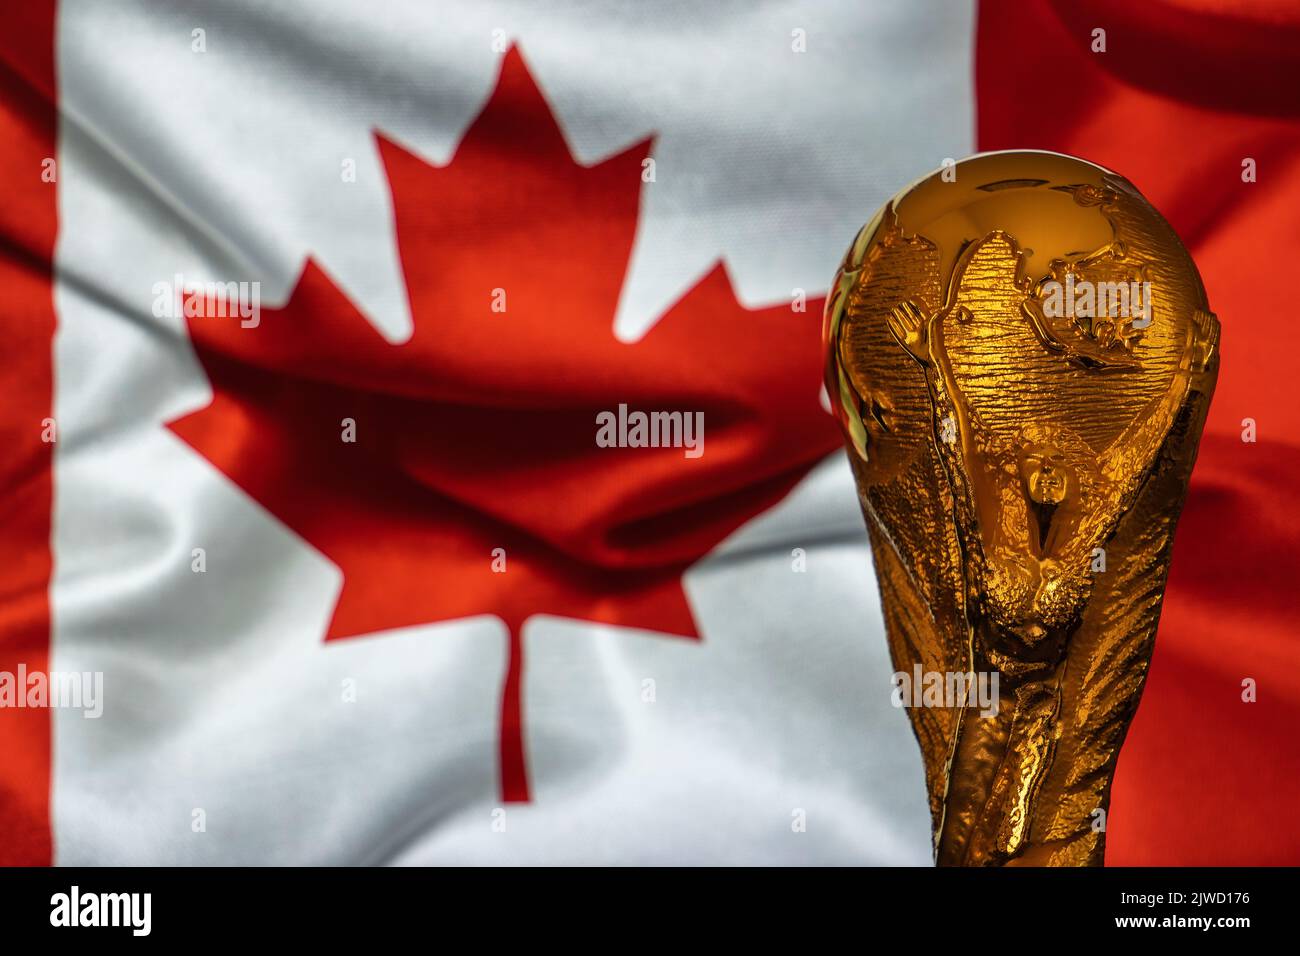 Doha, Qatar - September 4, 2022: FIFA World Cup trophy against the background of Canada flag. Stock Photo